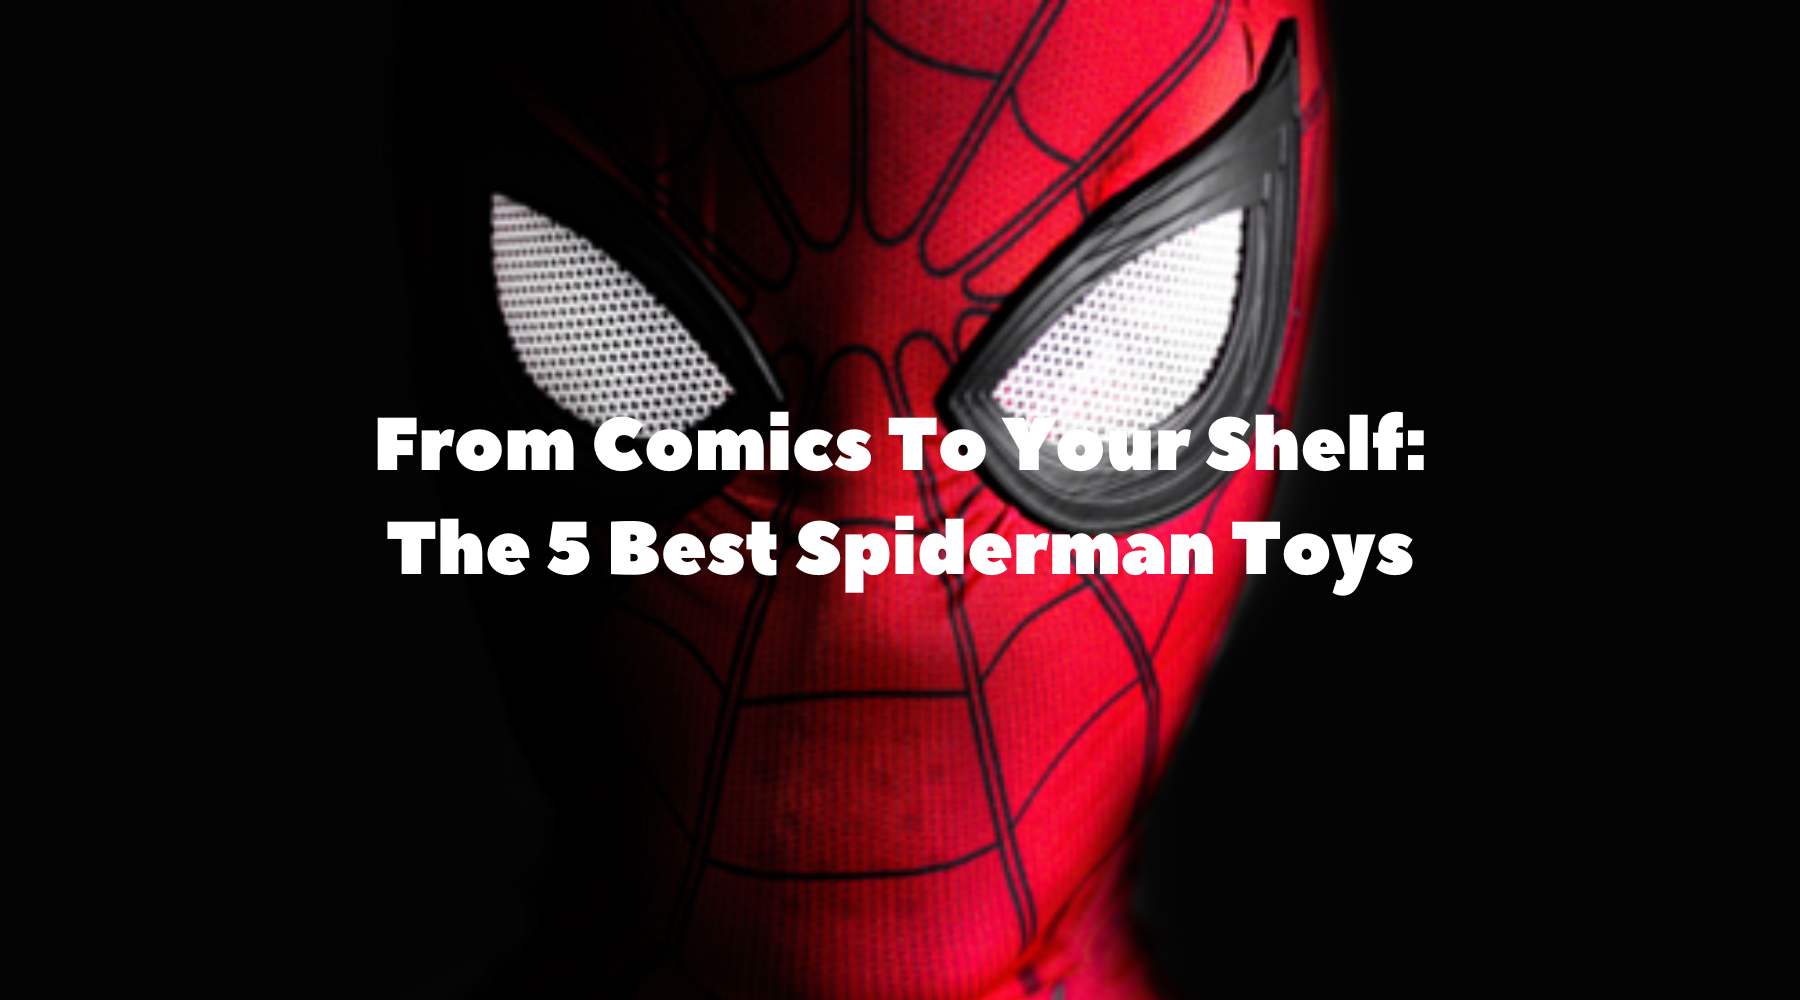 From Comics To Your Shelf: The 5 Best Spiderman Toys